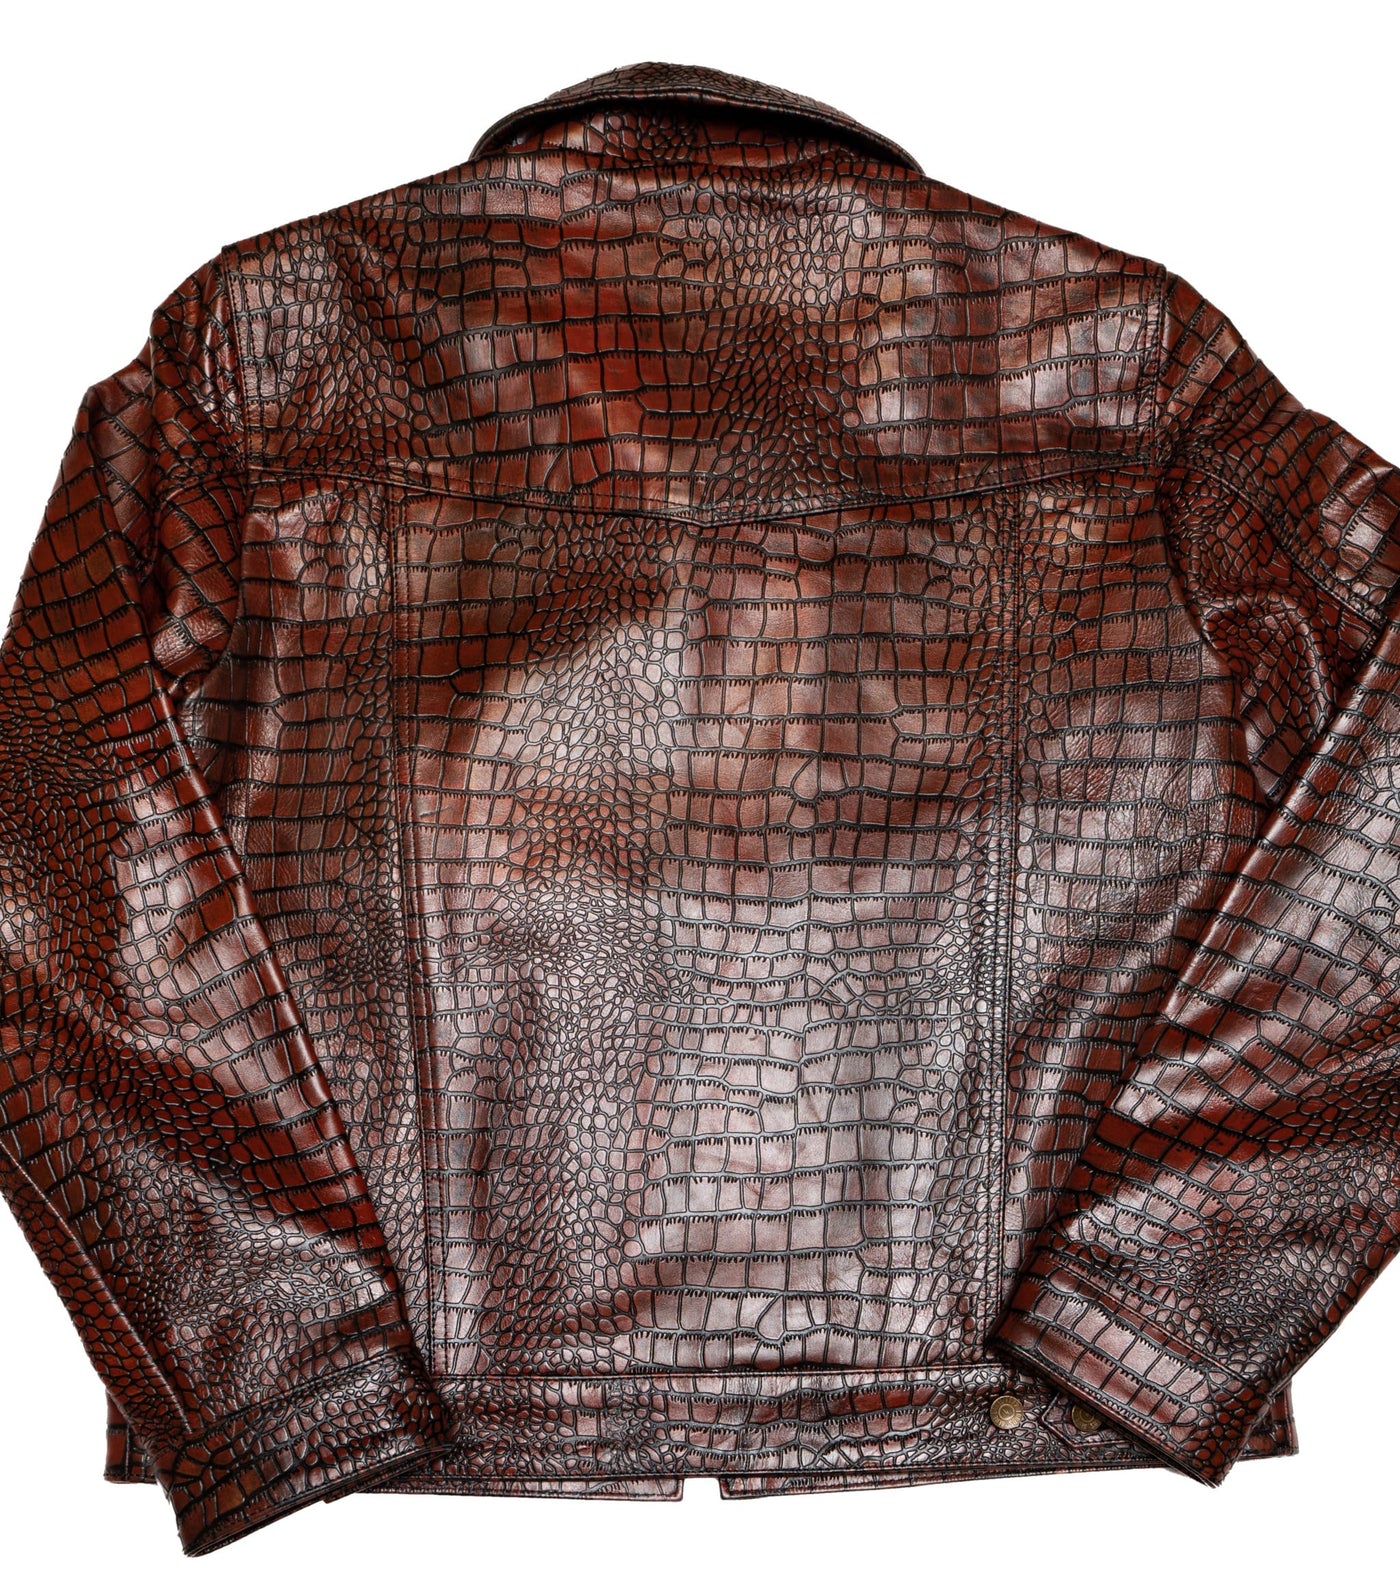 Lords x Cleaver Culture Steazy Ryder Jacket - Ox Blood Crocodile Leather